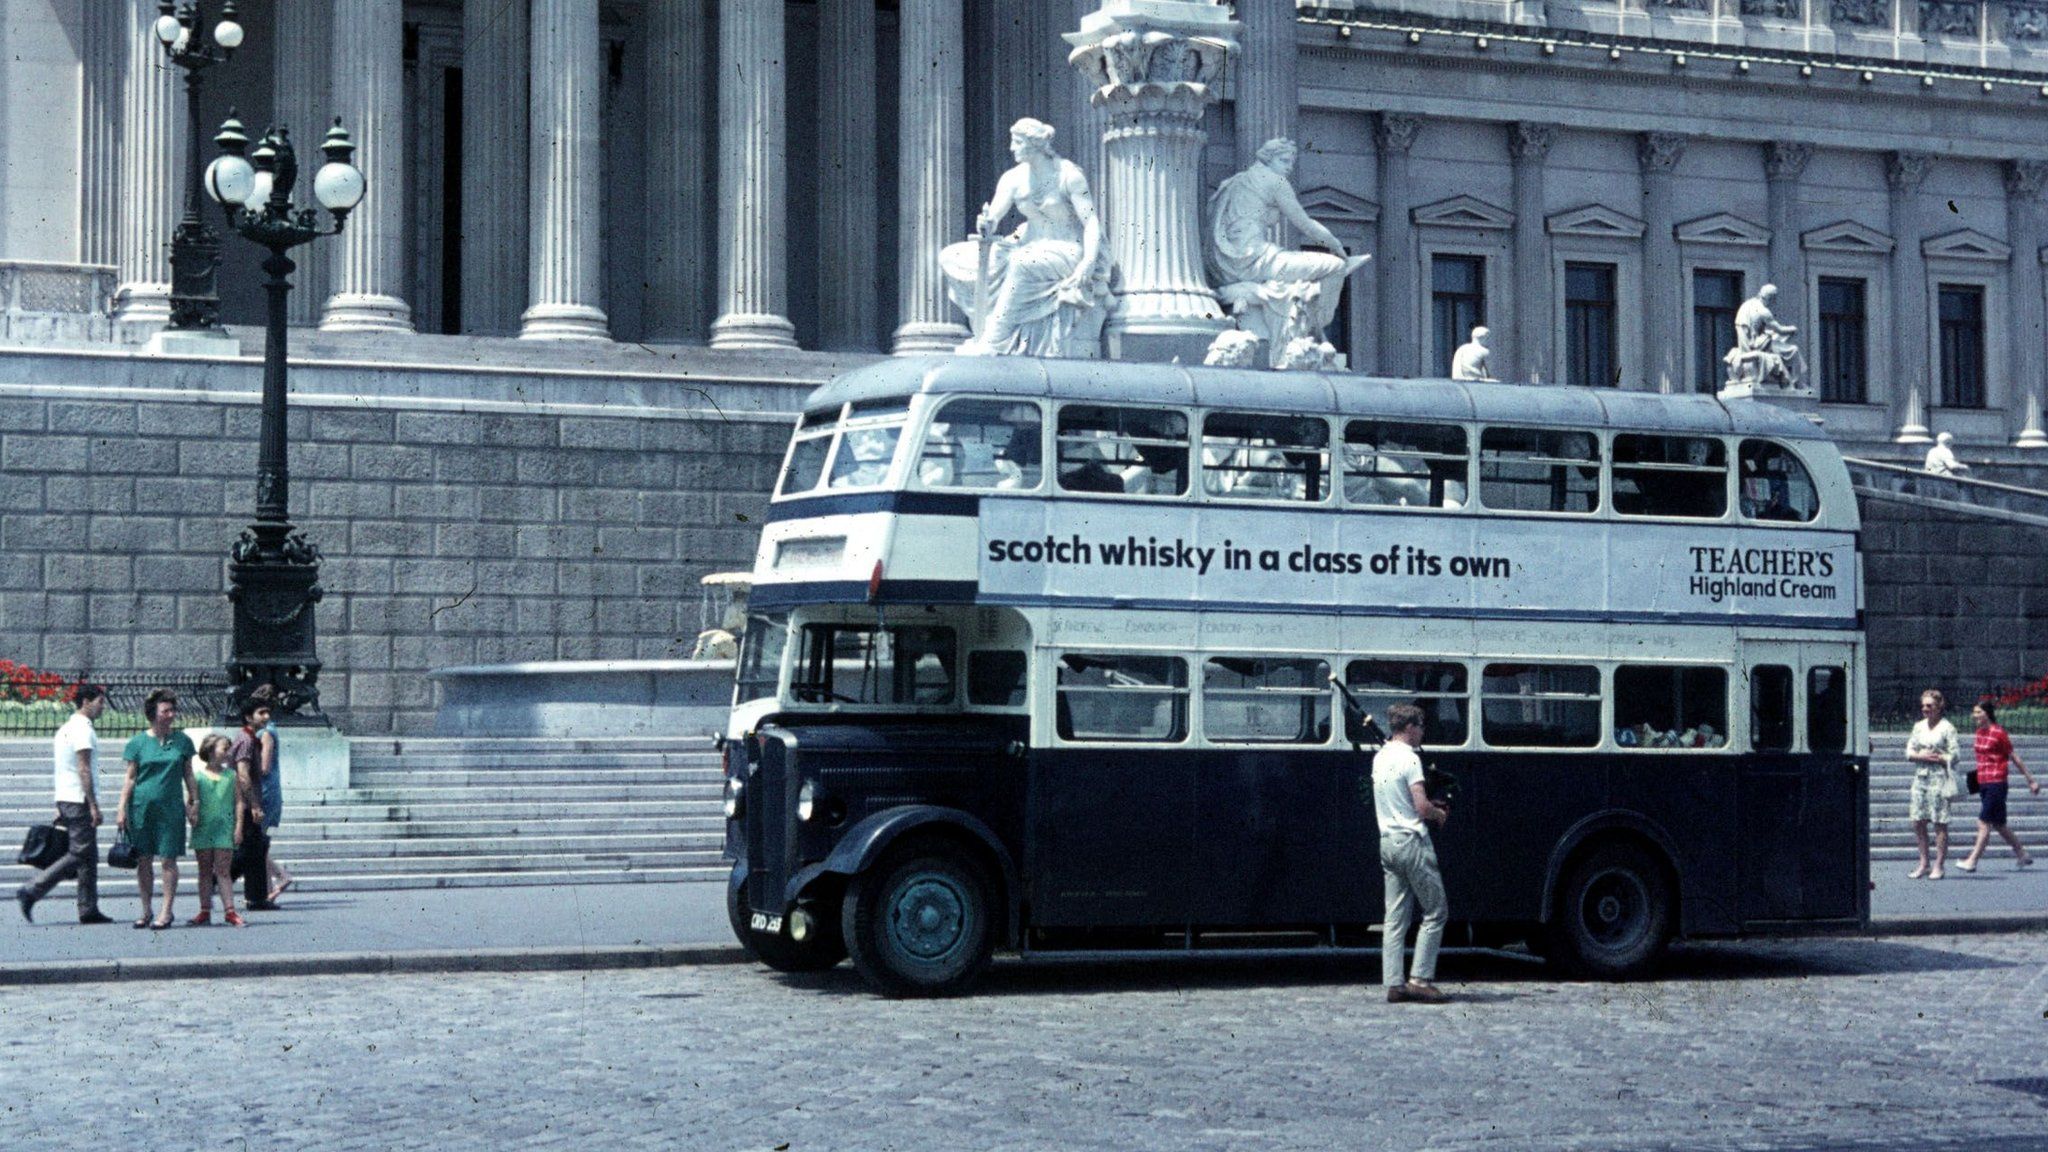 The bus in Vienna by the parliament building on the Dr Karl Renner Ring